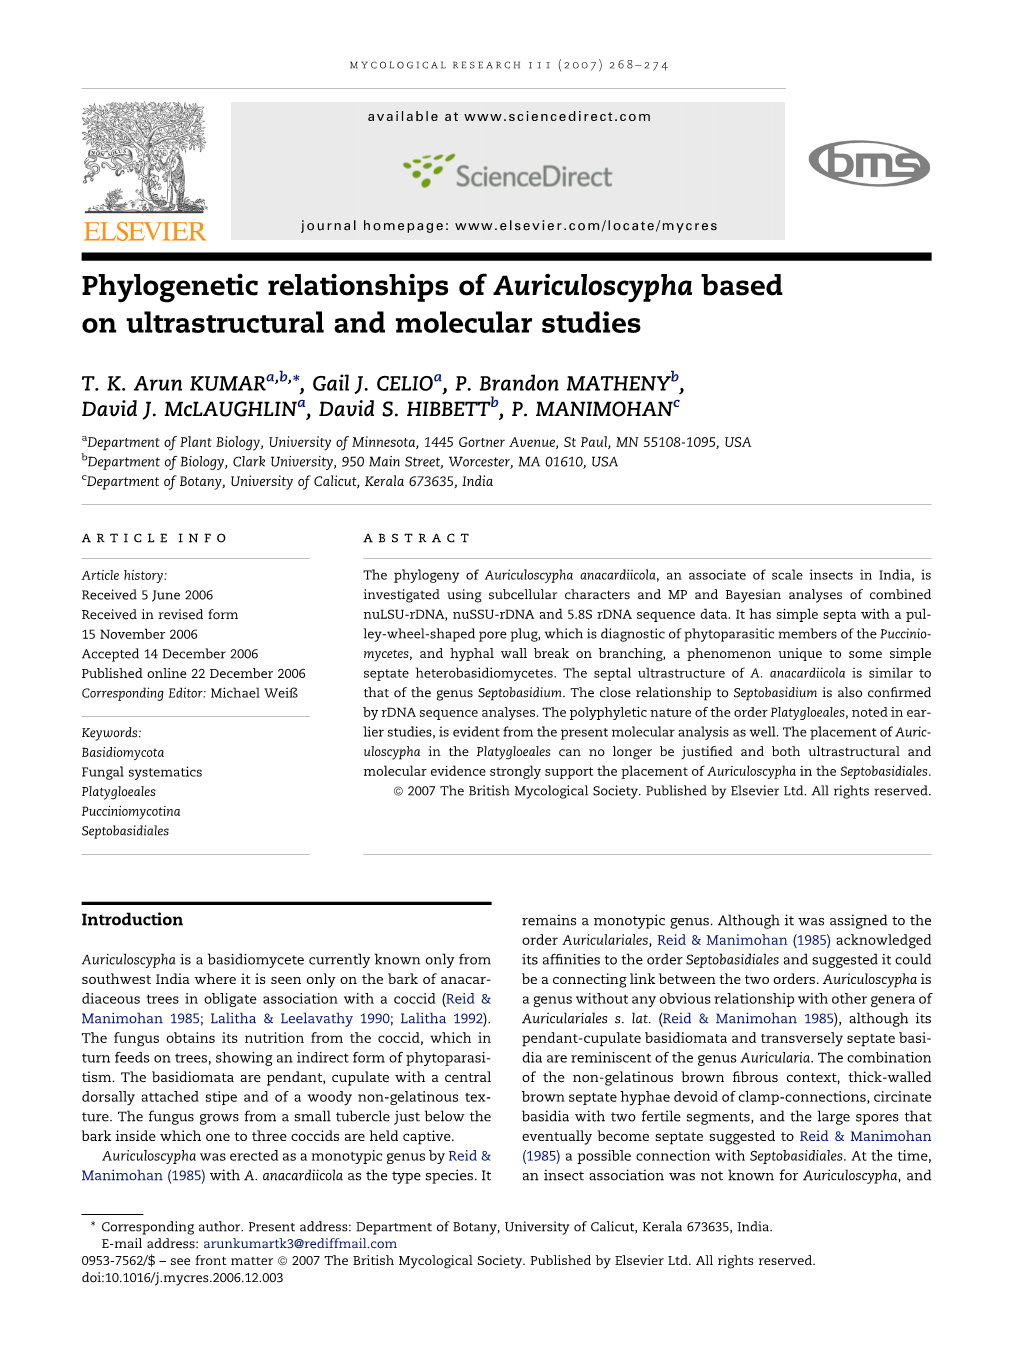 Phylogenetic Relationships of Auriculoscypha Based on Ultrastructural and Molecular Studies